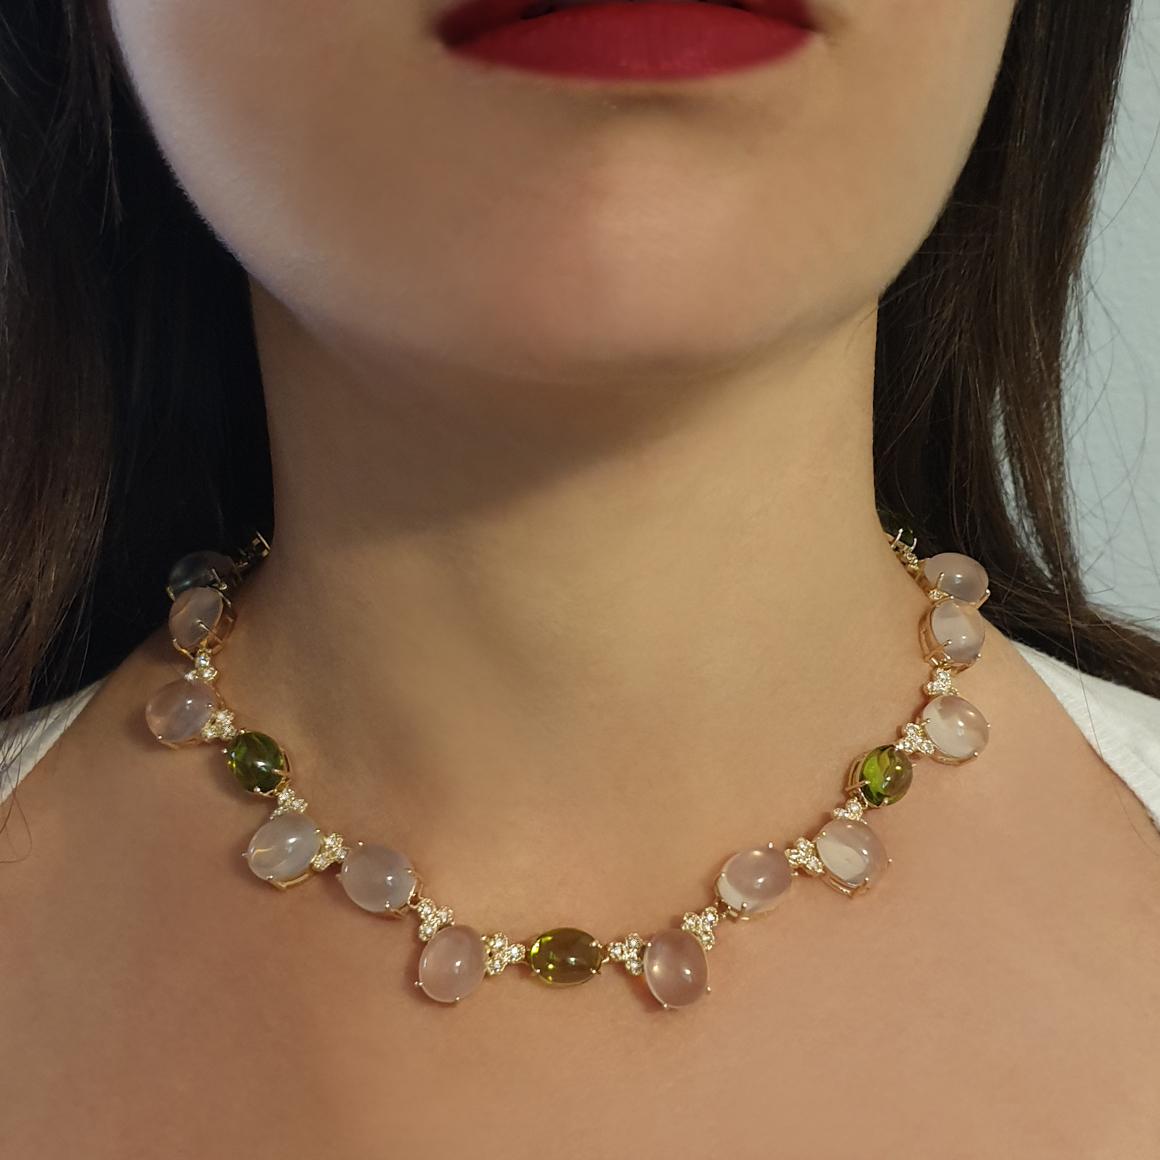 Necklace in 14k rose gold with Pink Quartz (oval cabochon cut, size:10x12 mm), Peridot cts 24.50 (oval cabochon cut, size: 9x11 mm) and Diamonds VS Color G/ H cts 0.70  cm.47   g.64,80
With this necklace we want to give you memorable emotions!